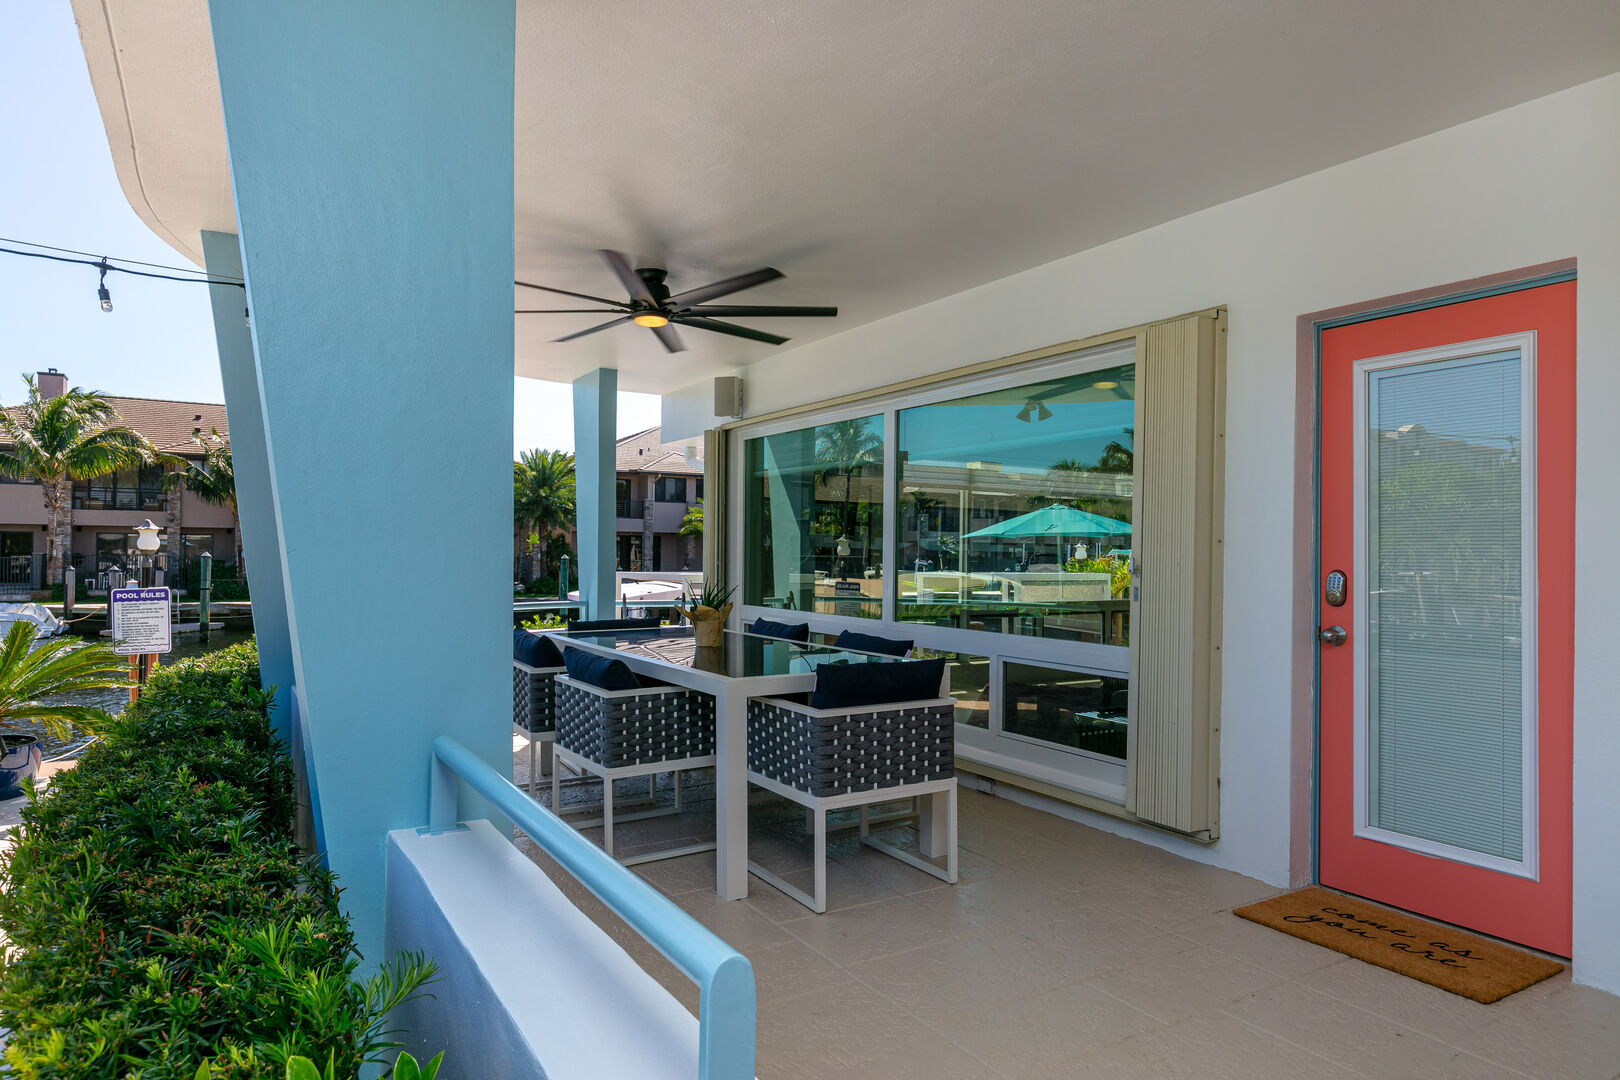 Salt Aire Key is made up of (4) separate luxury condos and a large common area with heated pool, hot tub, multiple loungers and a private dock on the lagoon.